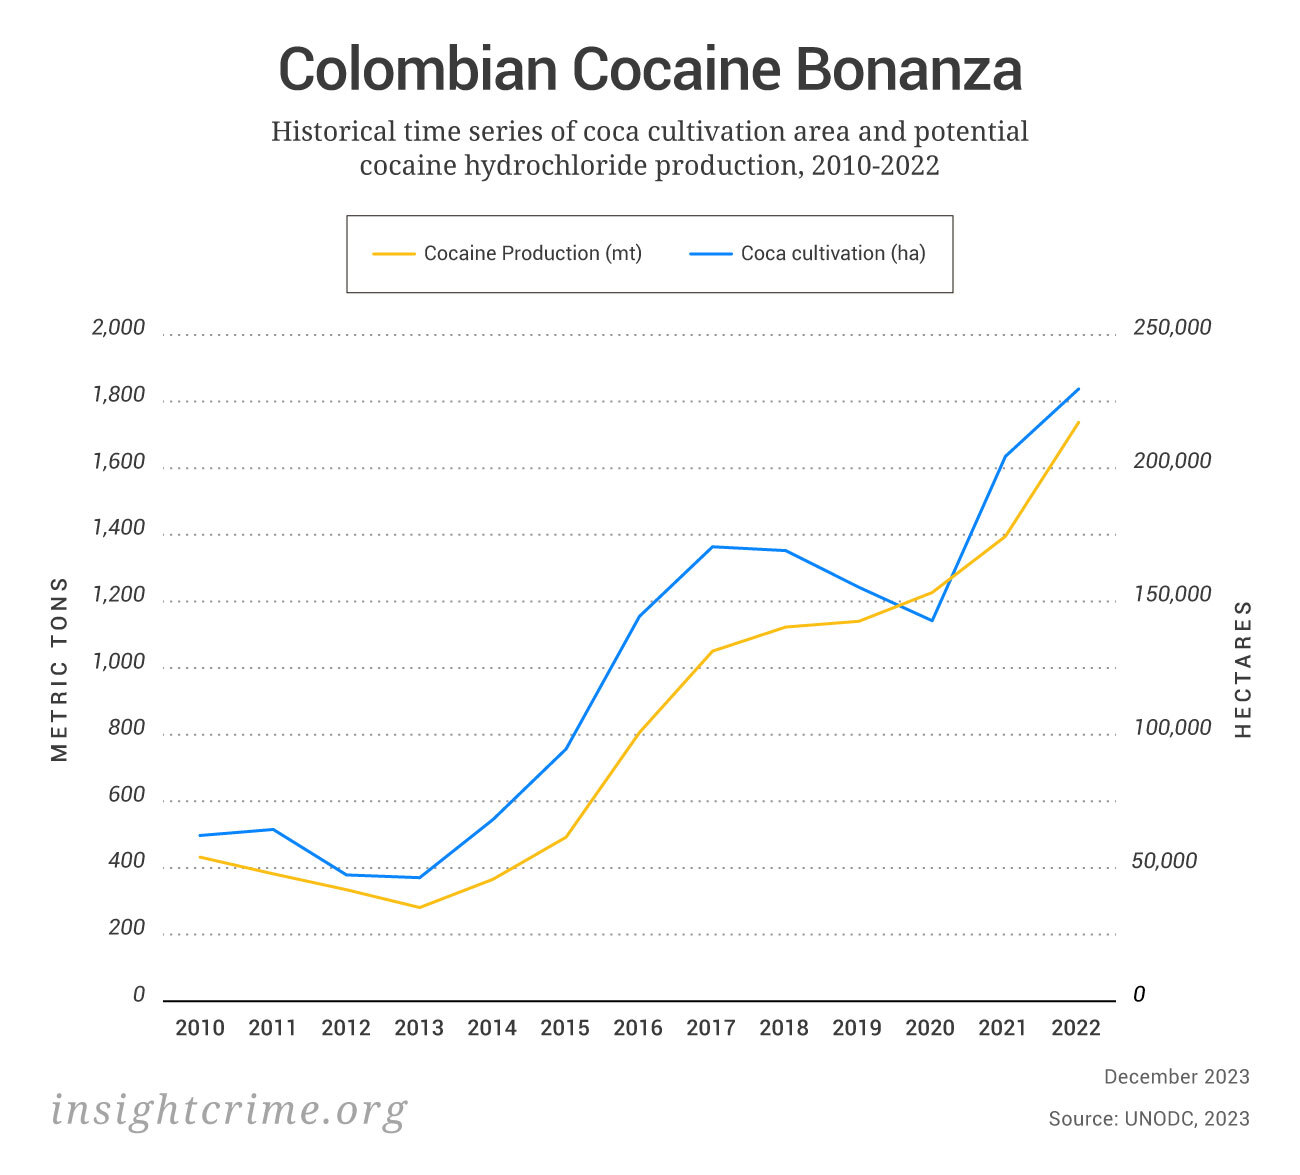 A graph depicting the increase in cocaine production and coca cultivation in Colombia from 2010 to 2022.